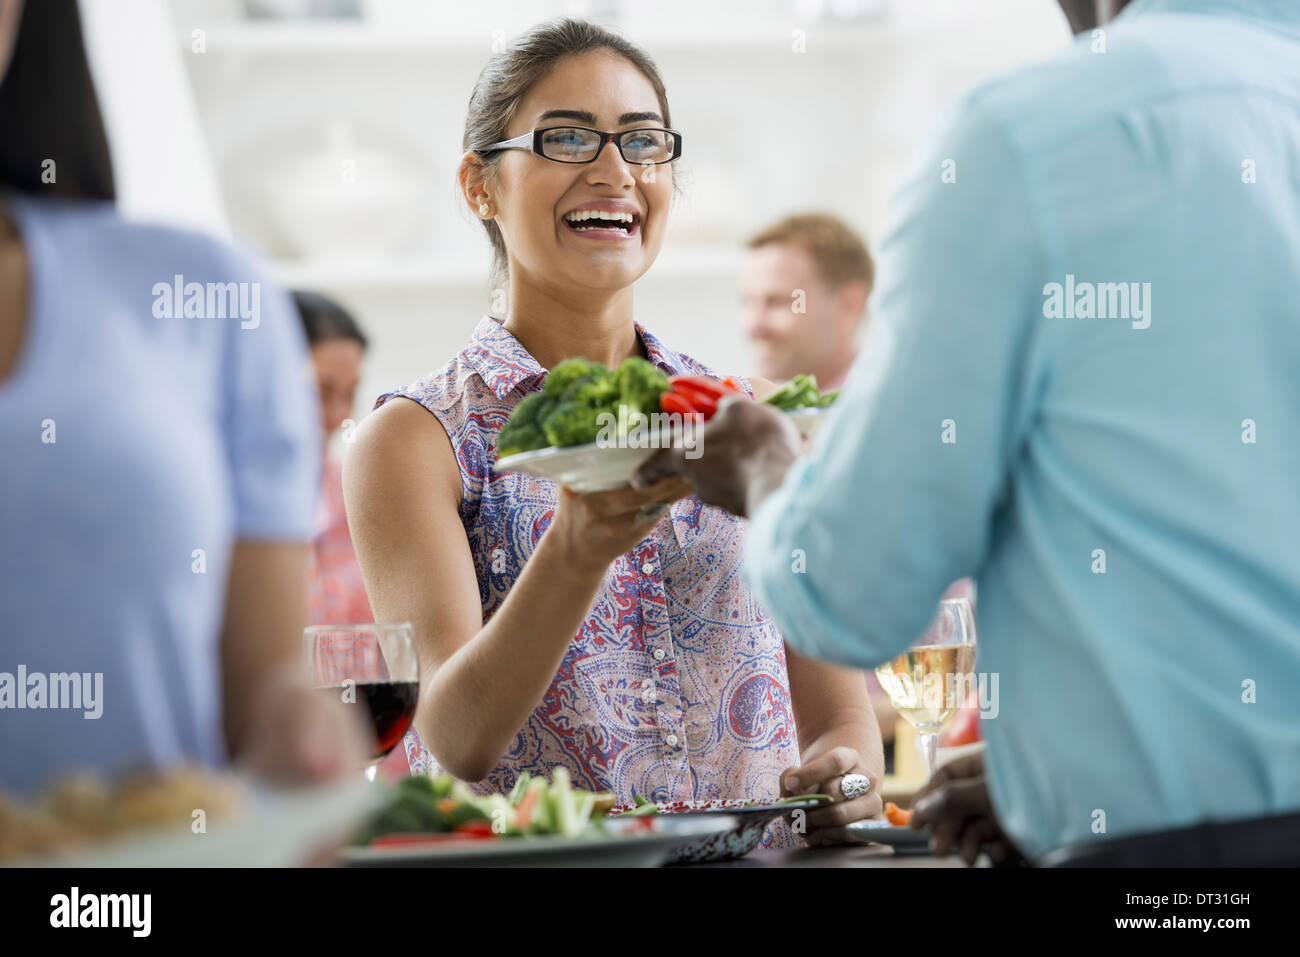 A picnic party of family adults and children Stock Photo